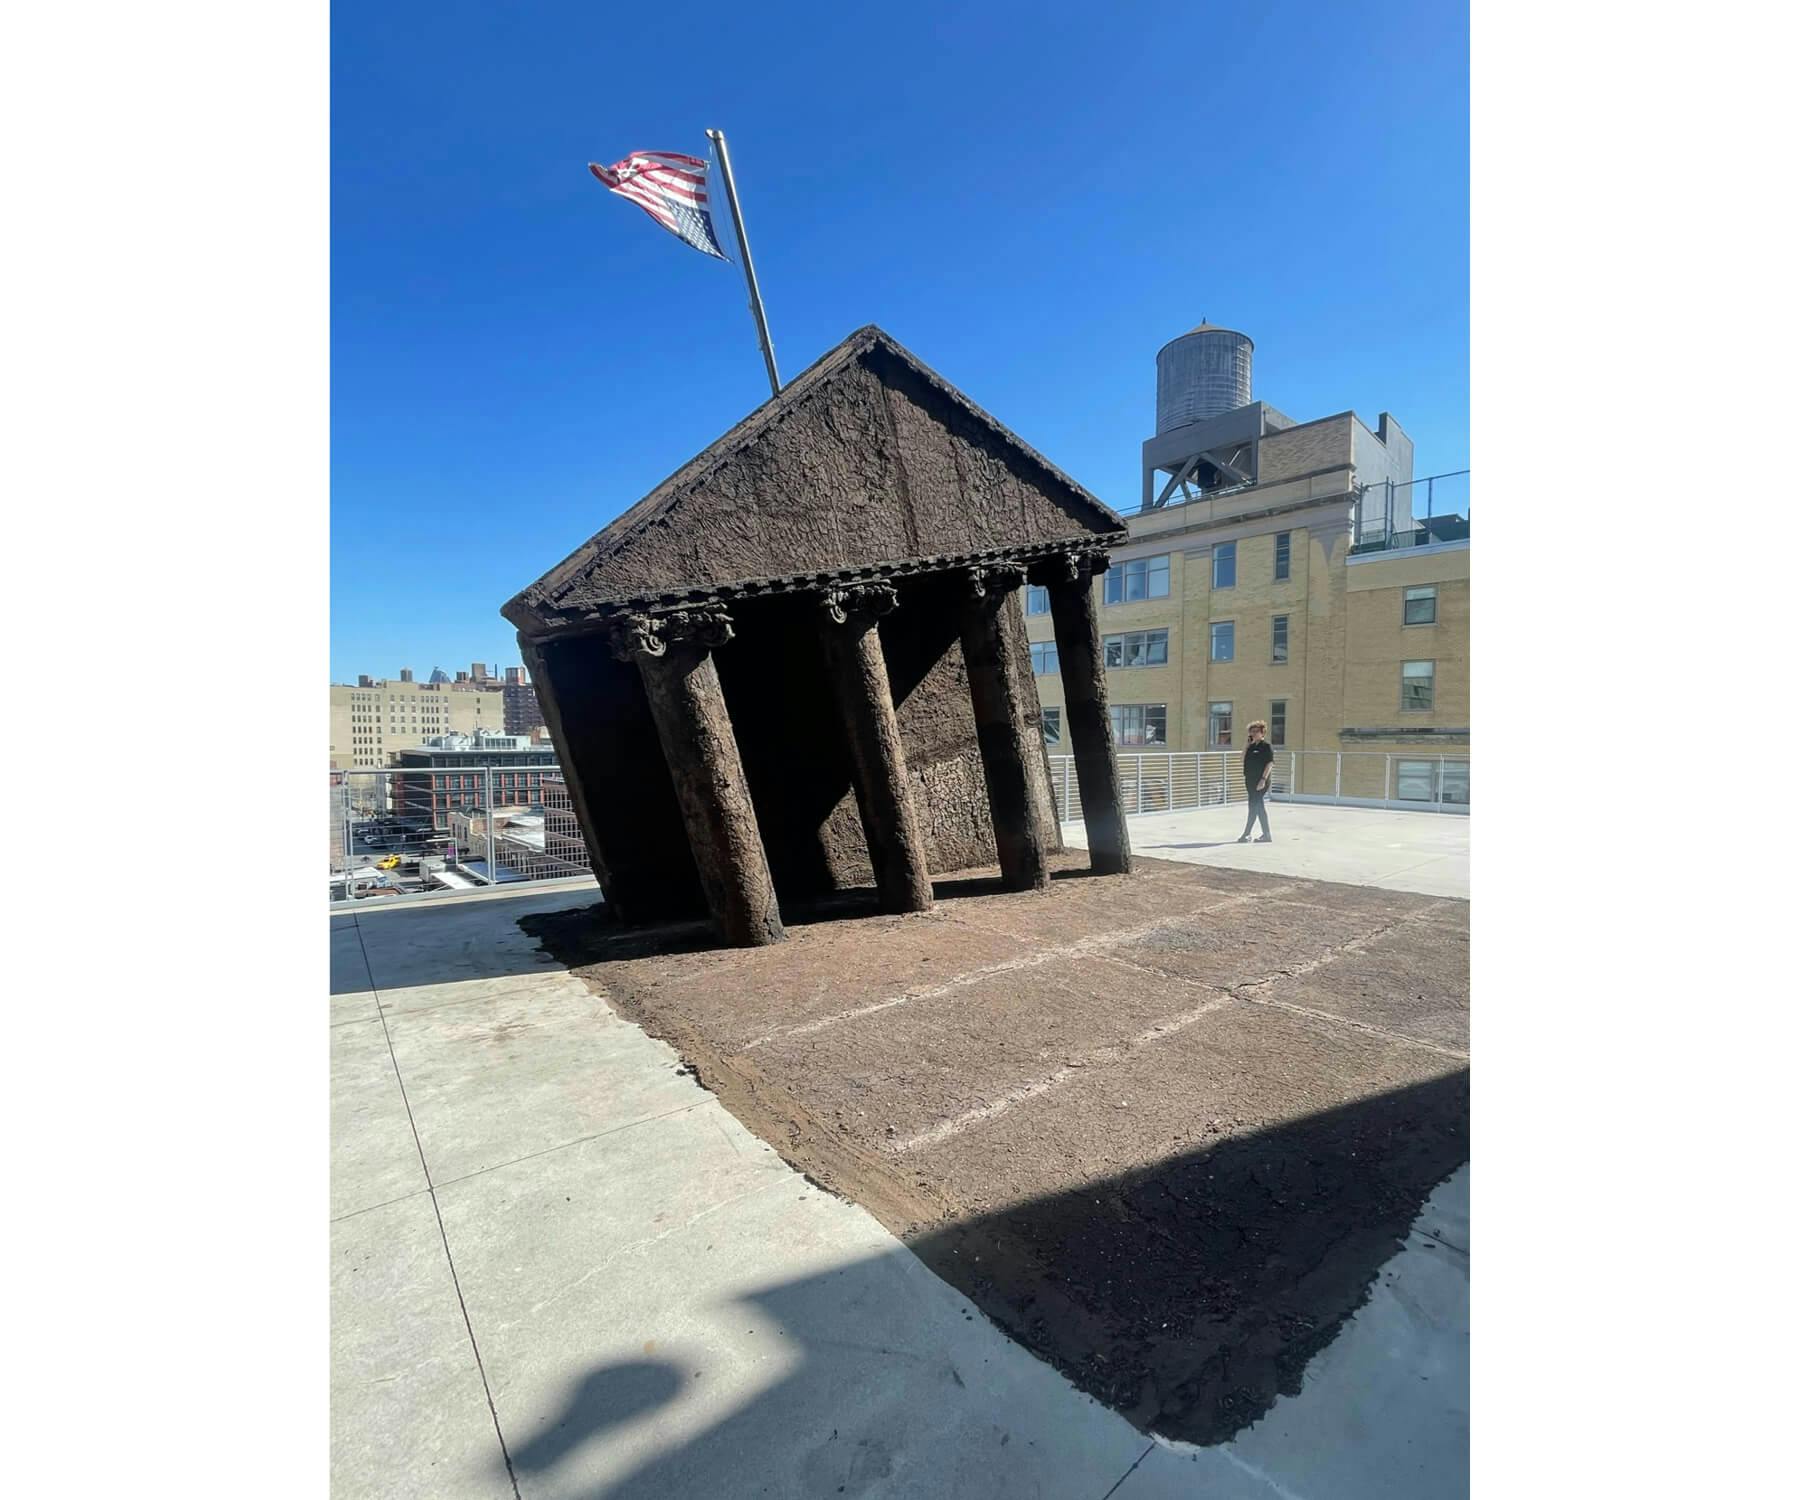 A sculpture of a slanting building with an upside down American flag pole stands in front of surrounding buildings.